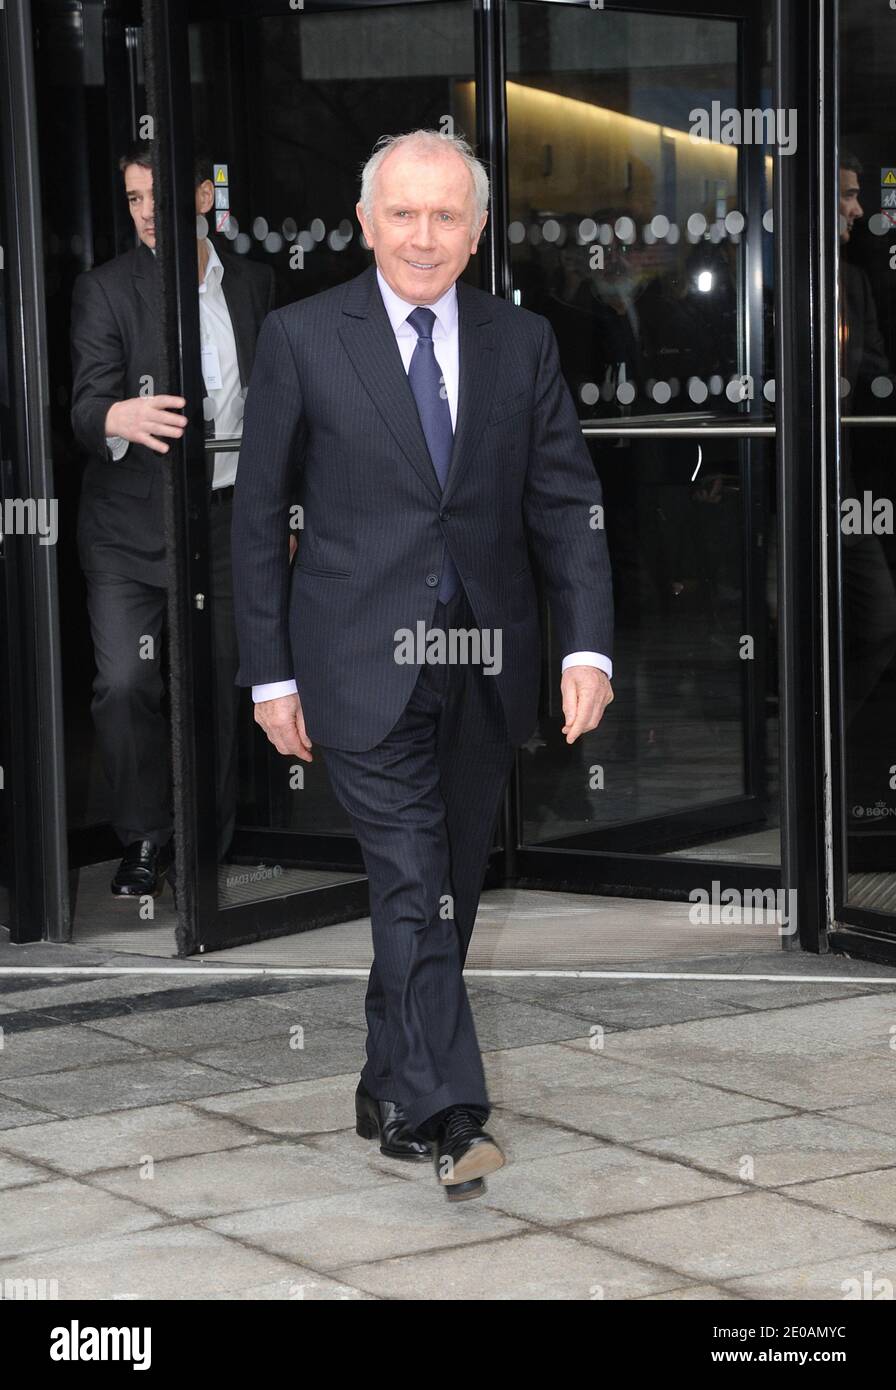 Francois Pinault leaving the Balenciaga Fall-Winter 2012-2013 Ready-To-Wear collection show held at Quai Javel in Paris, France on March 1, 2012, as part of the Paris Fashion Week. Photo by Giancarlo Gorassini/ABACAPRESS.COM Stock Photo